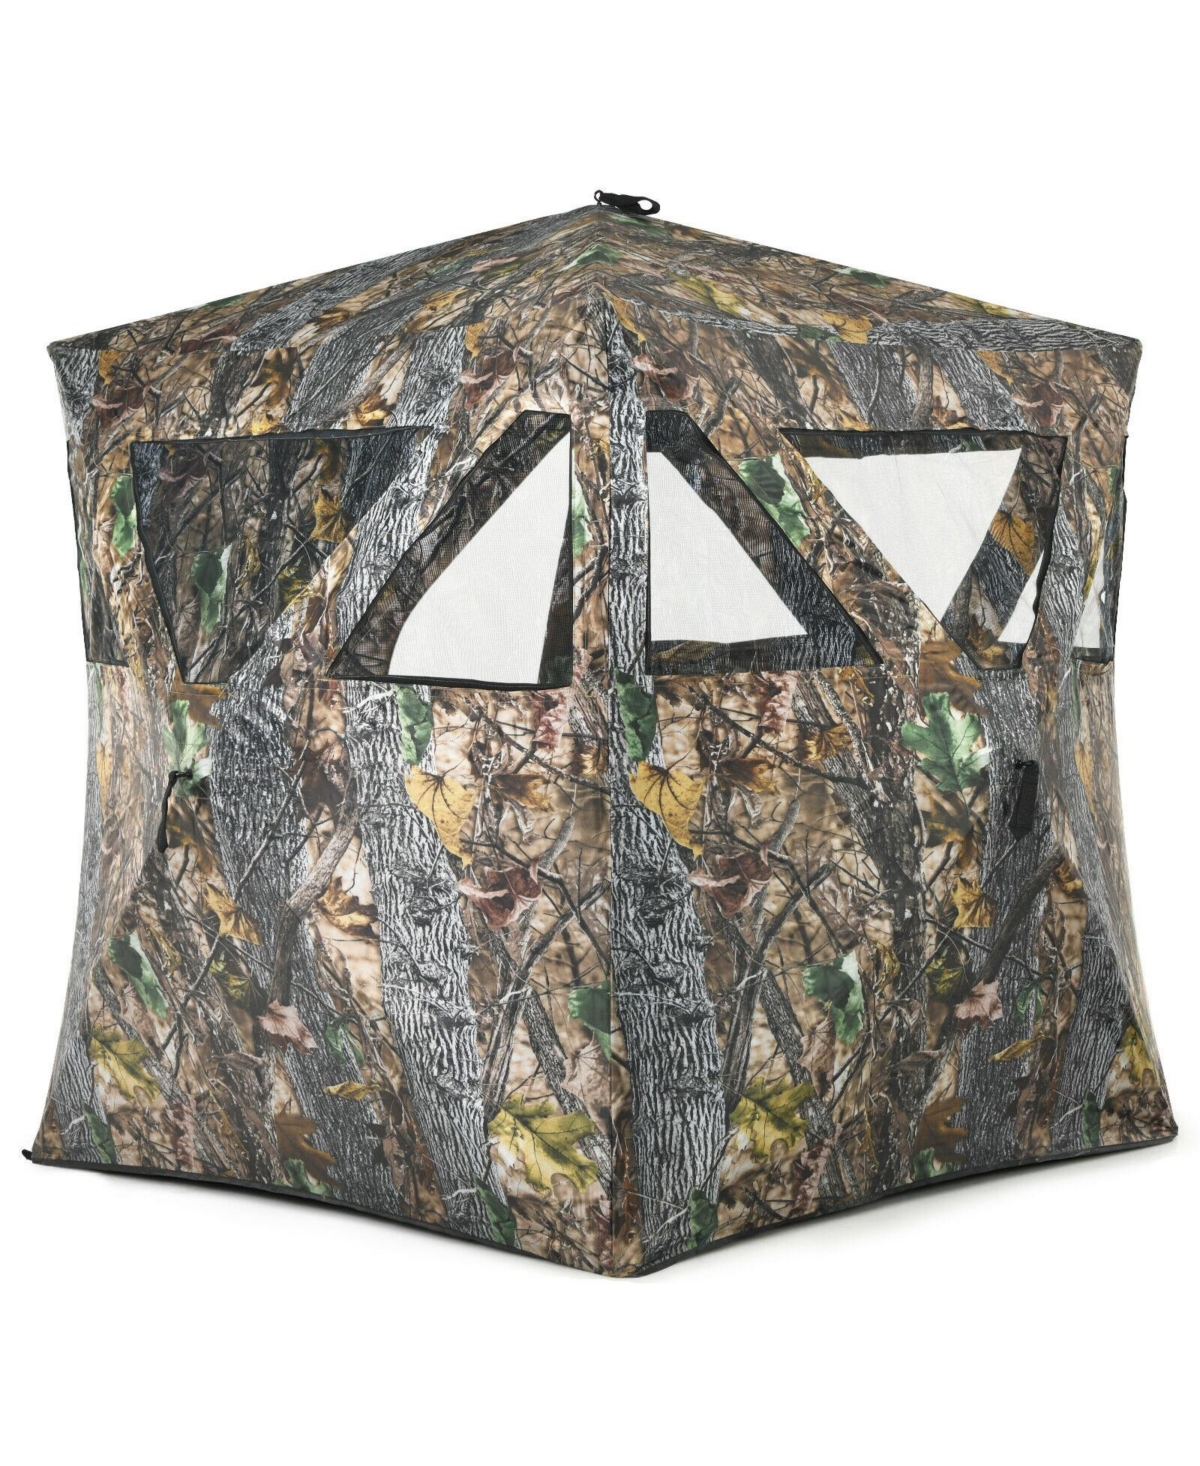 3 Person Portable Pop-Up Ground Hunting Blind with Tie-downs - Camouflage